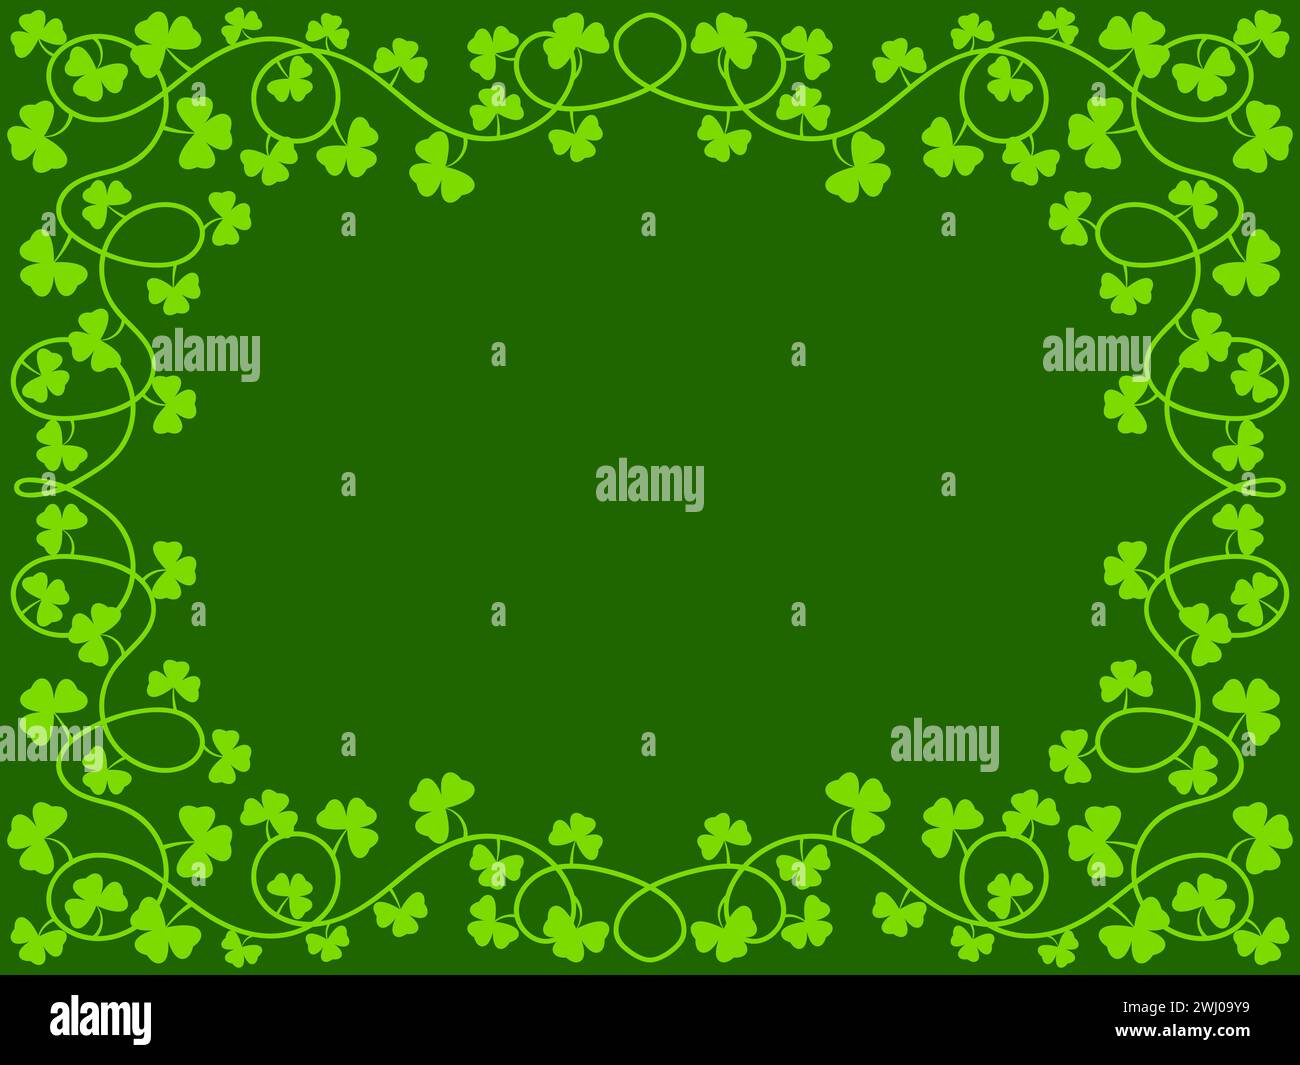 Clover leaf frame for St. Patrick's Day. Border with shamrocks with place for text. Irish holiday frame design for greeting cards, flyers and invitati Stock Vector